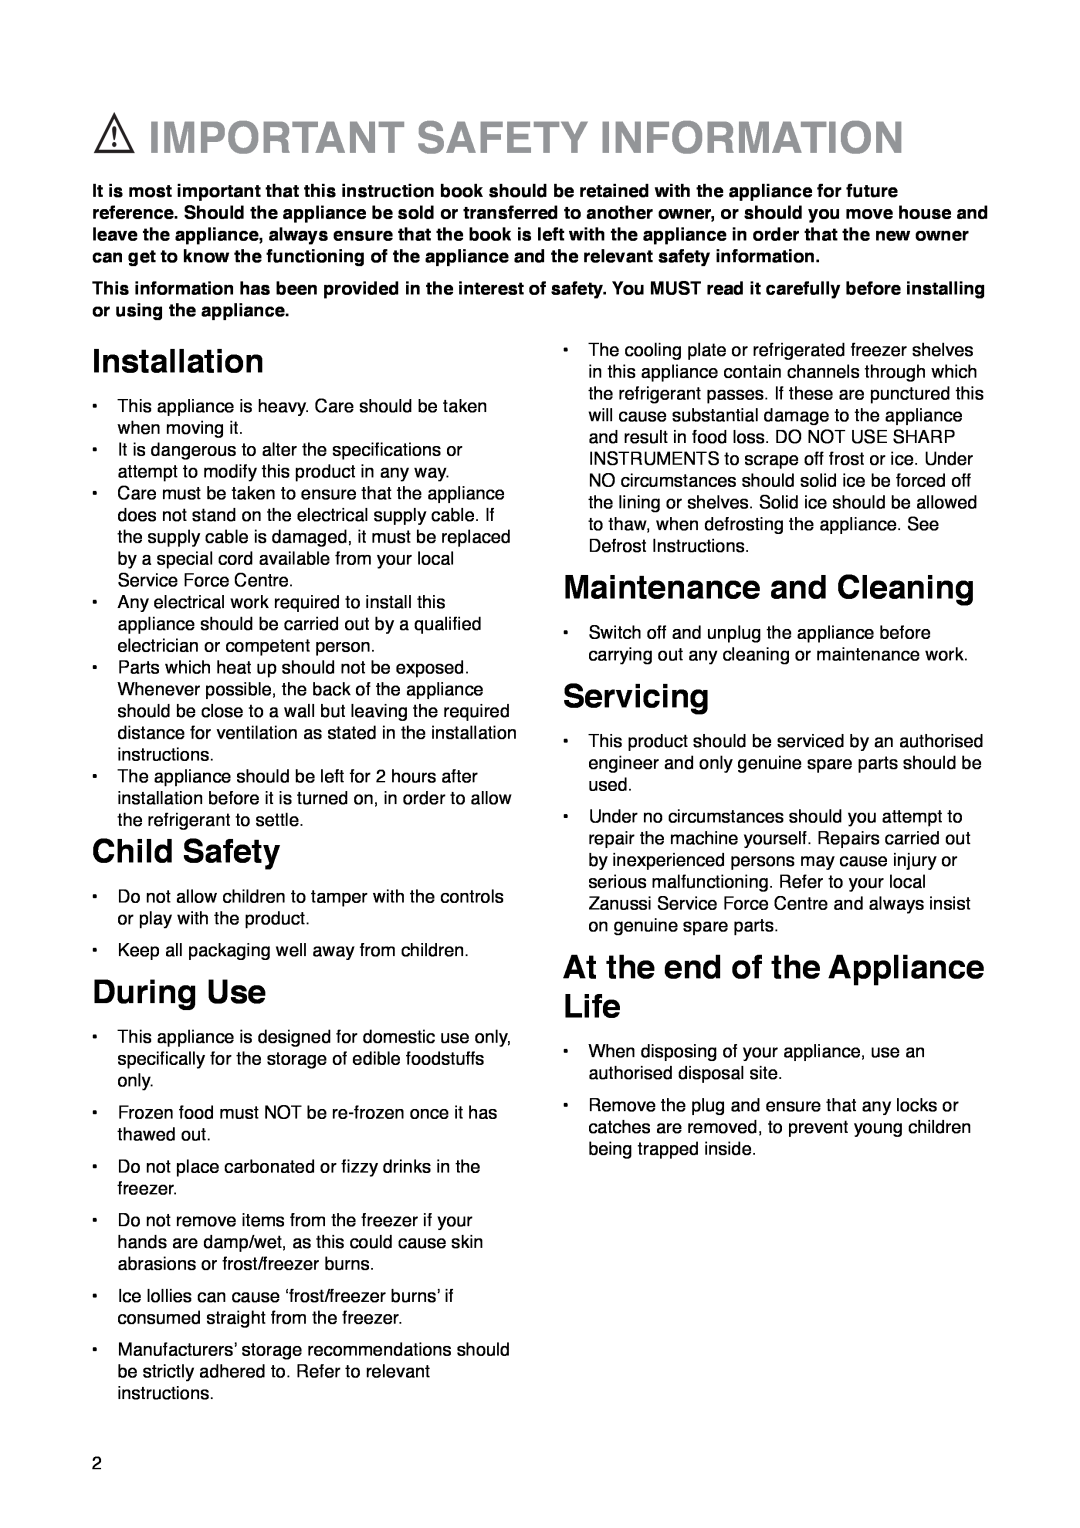 Zanussi ZF 67 Important Safety Information, Installation, Child Safety, During Use, Maintenance and Cleaning, Servicing 